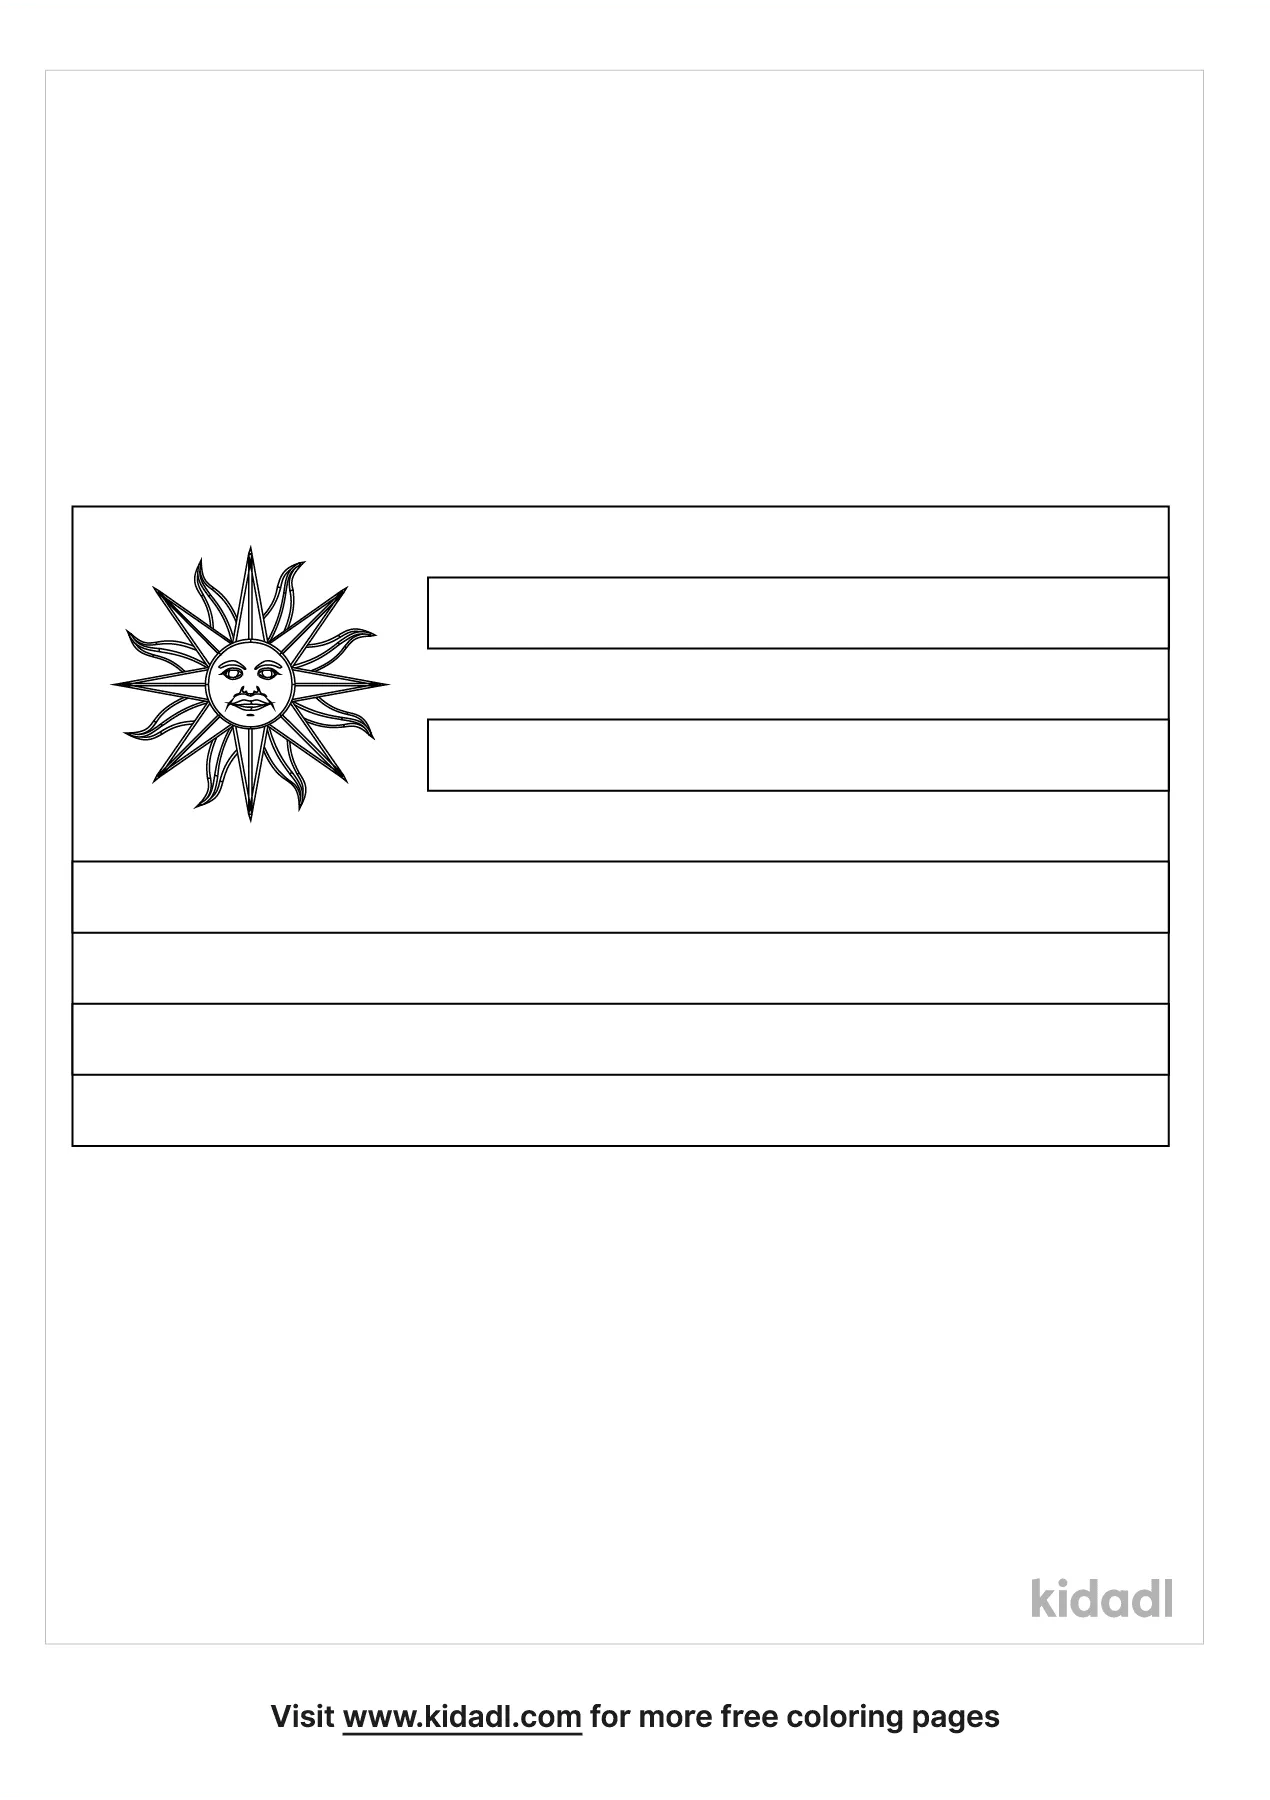 Free uruguay flag coloring page coloring page printables